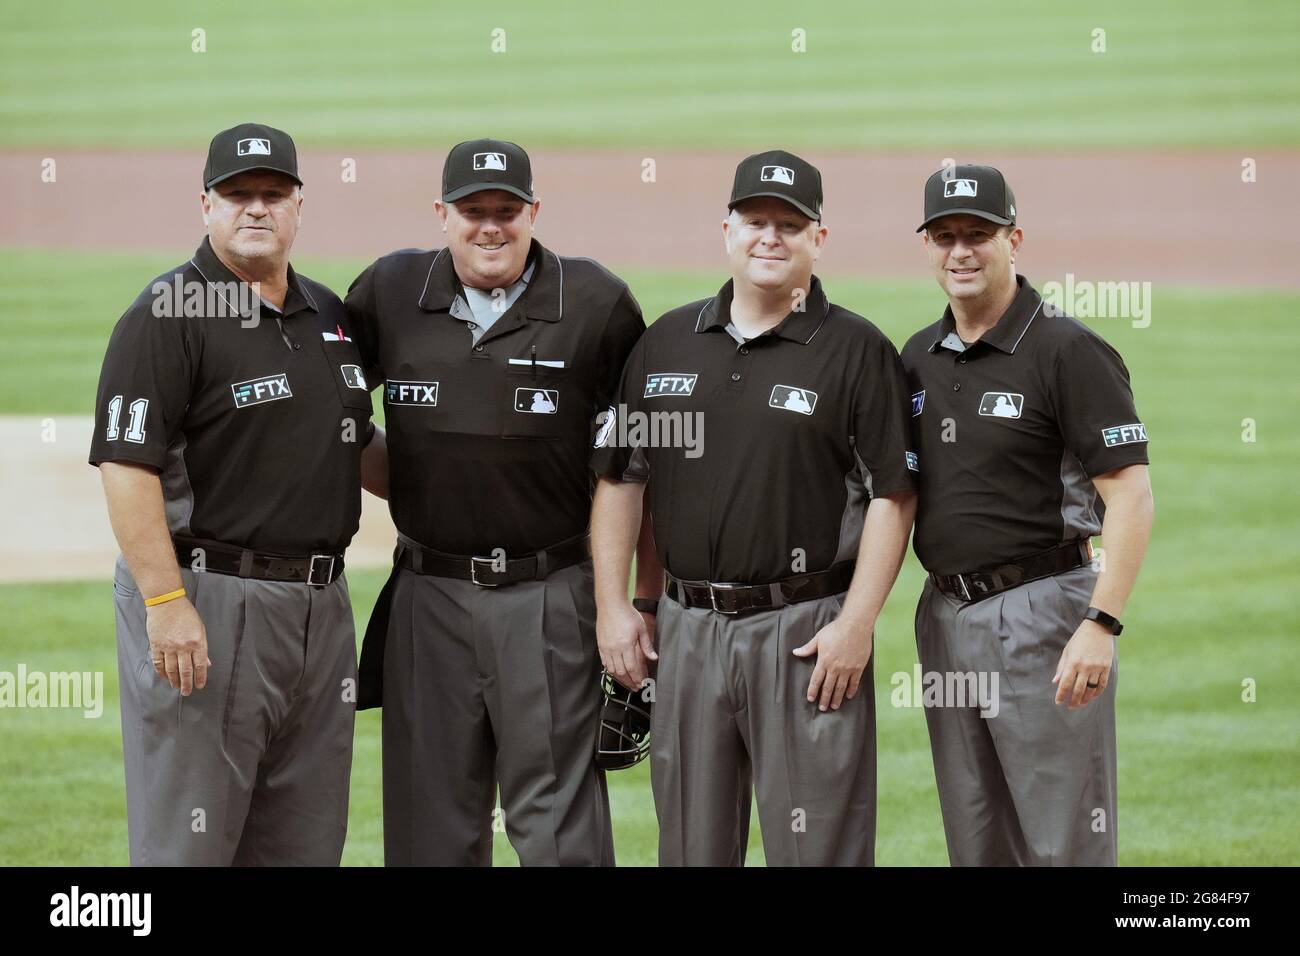 St. Louis, USA. 16th July, 2021. Major League Umpires (L to R